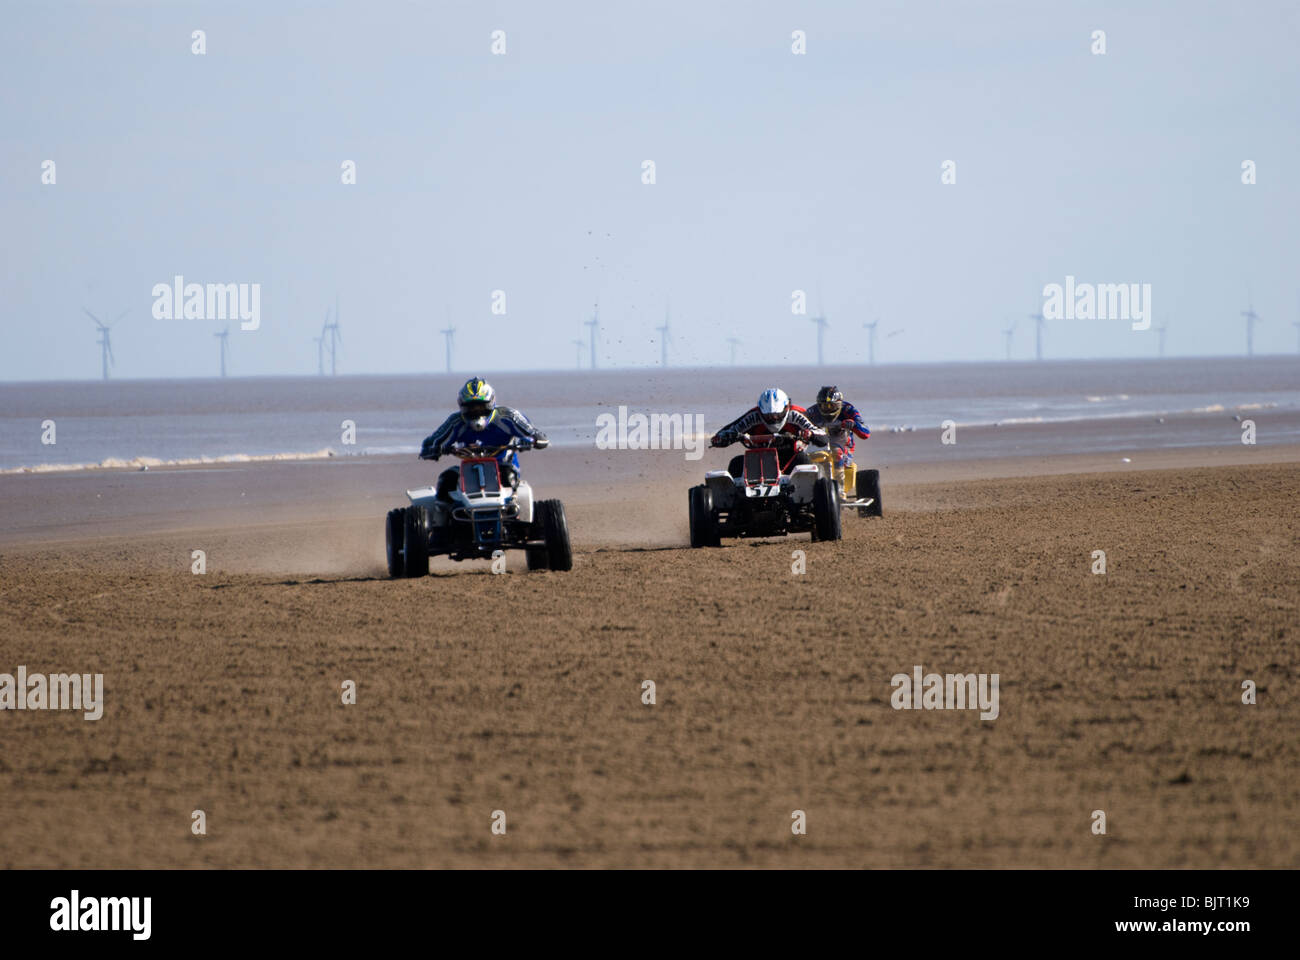 Quad bikes sand racing on the beach with wind turbines in the background out at sea, Mablethorpe, Lincolnshire, England, UK Stock Photo